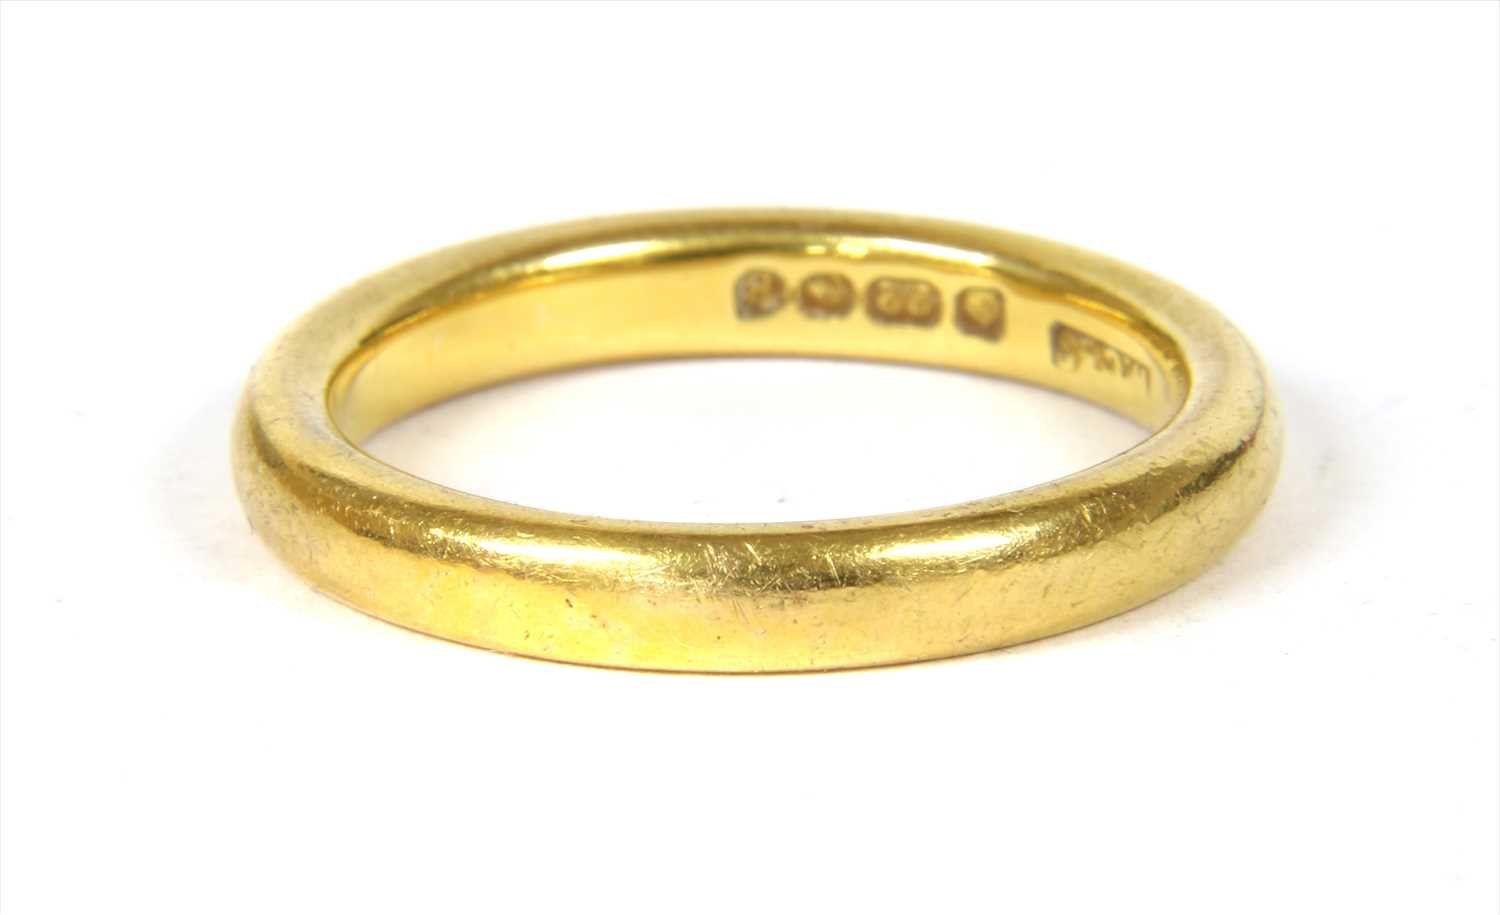 Lot 46 - A 22ct gold wedding ring